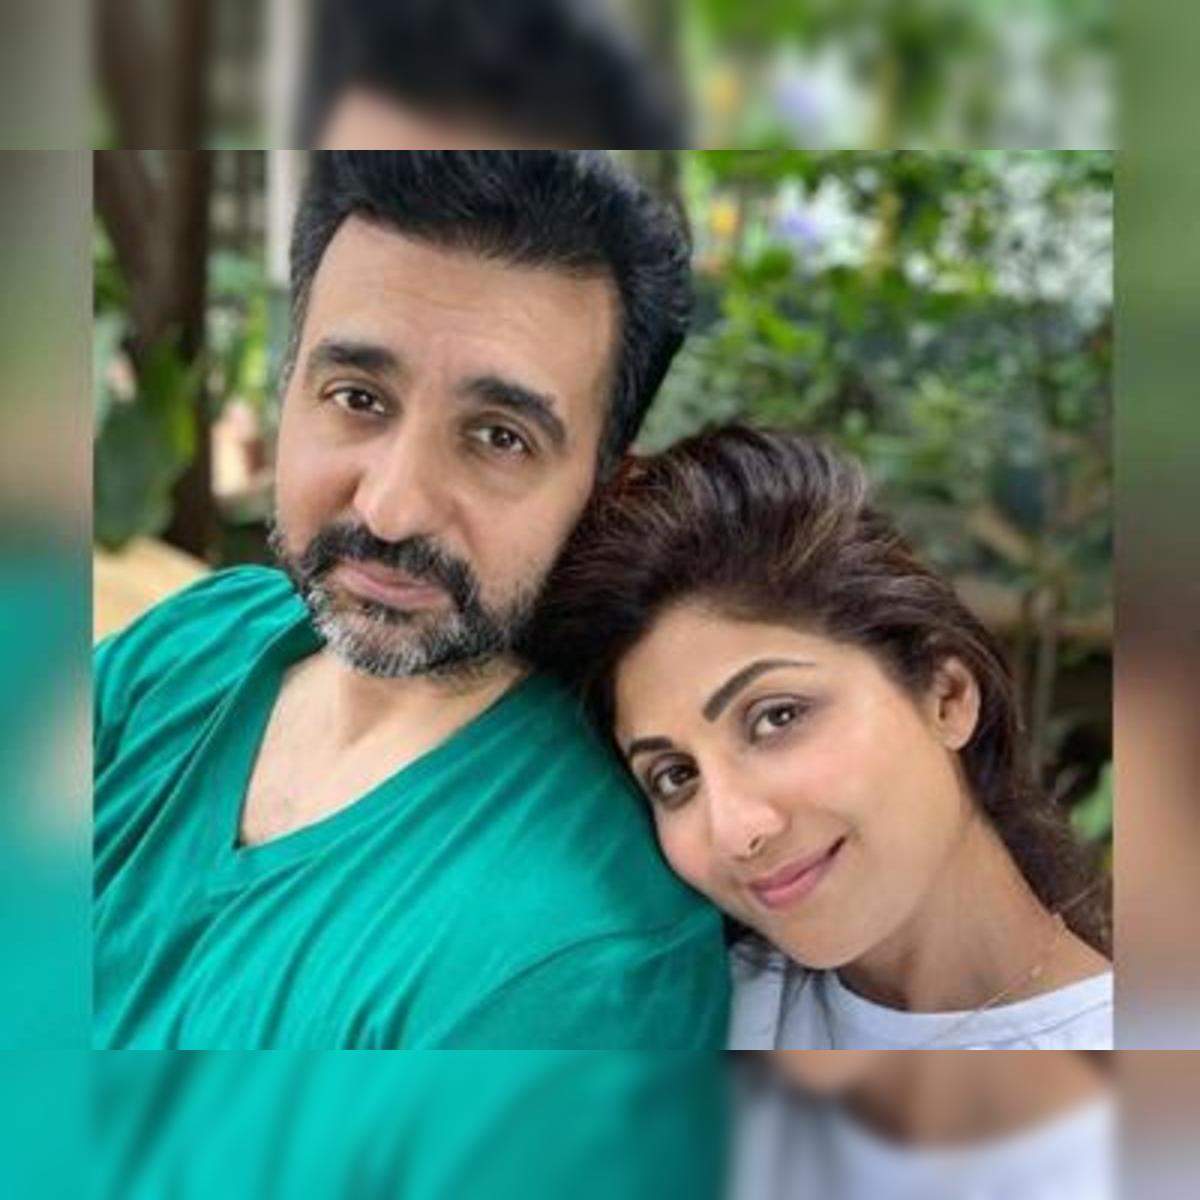 Raj Kundra earned Rs 1.17 crore from porn films, Mumbai Police tells court;  no clean chit to Shilpa Shetty yet - The Economic Times